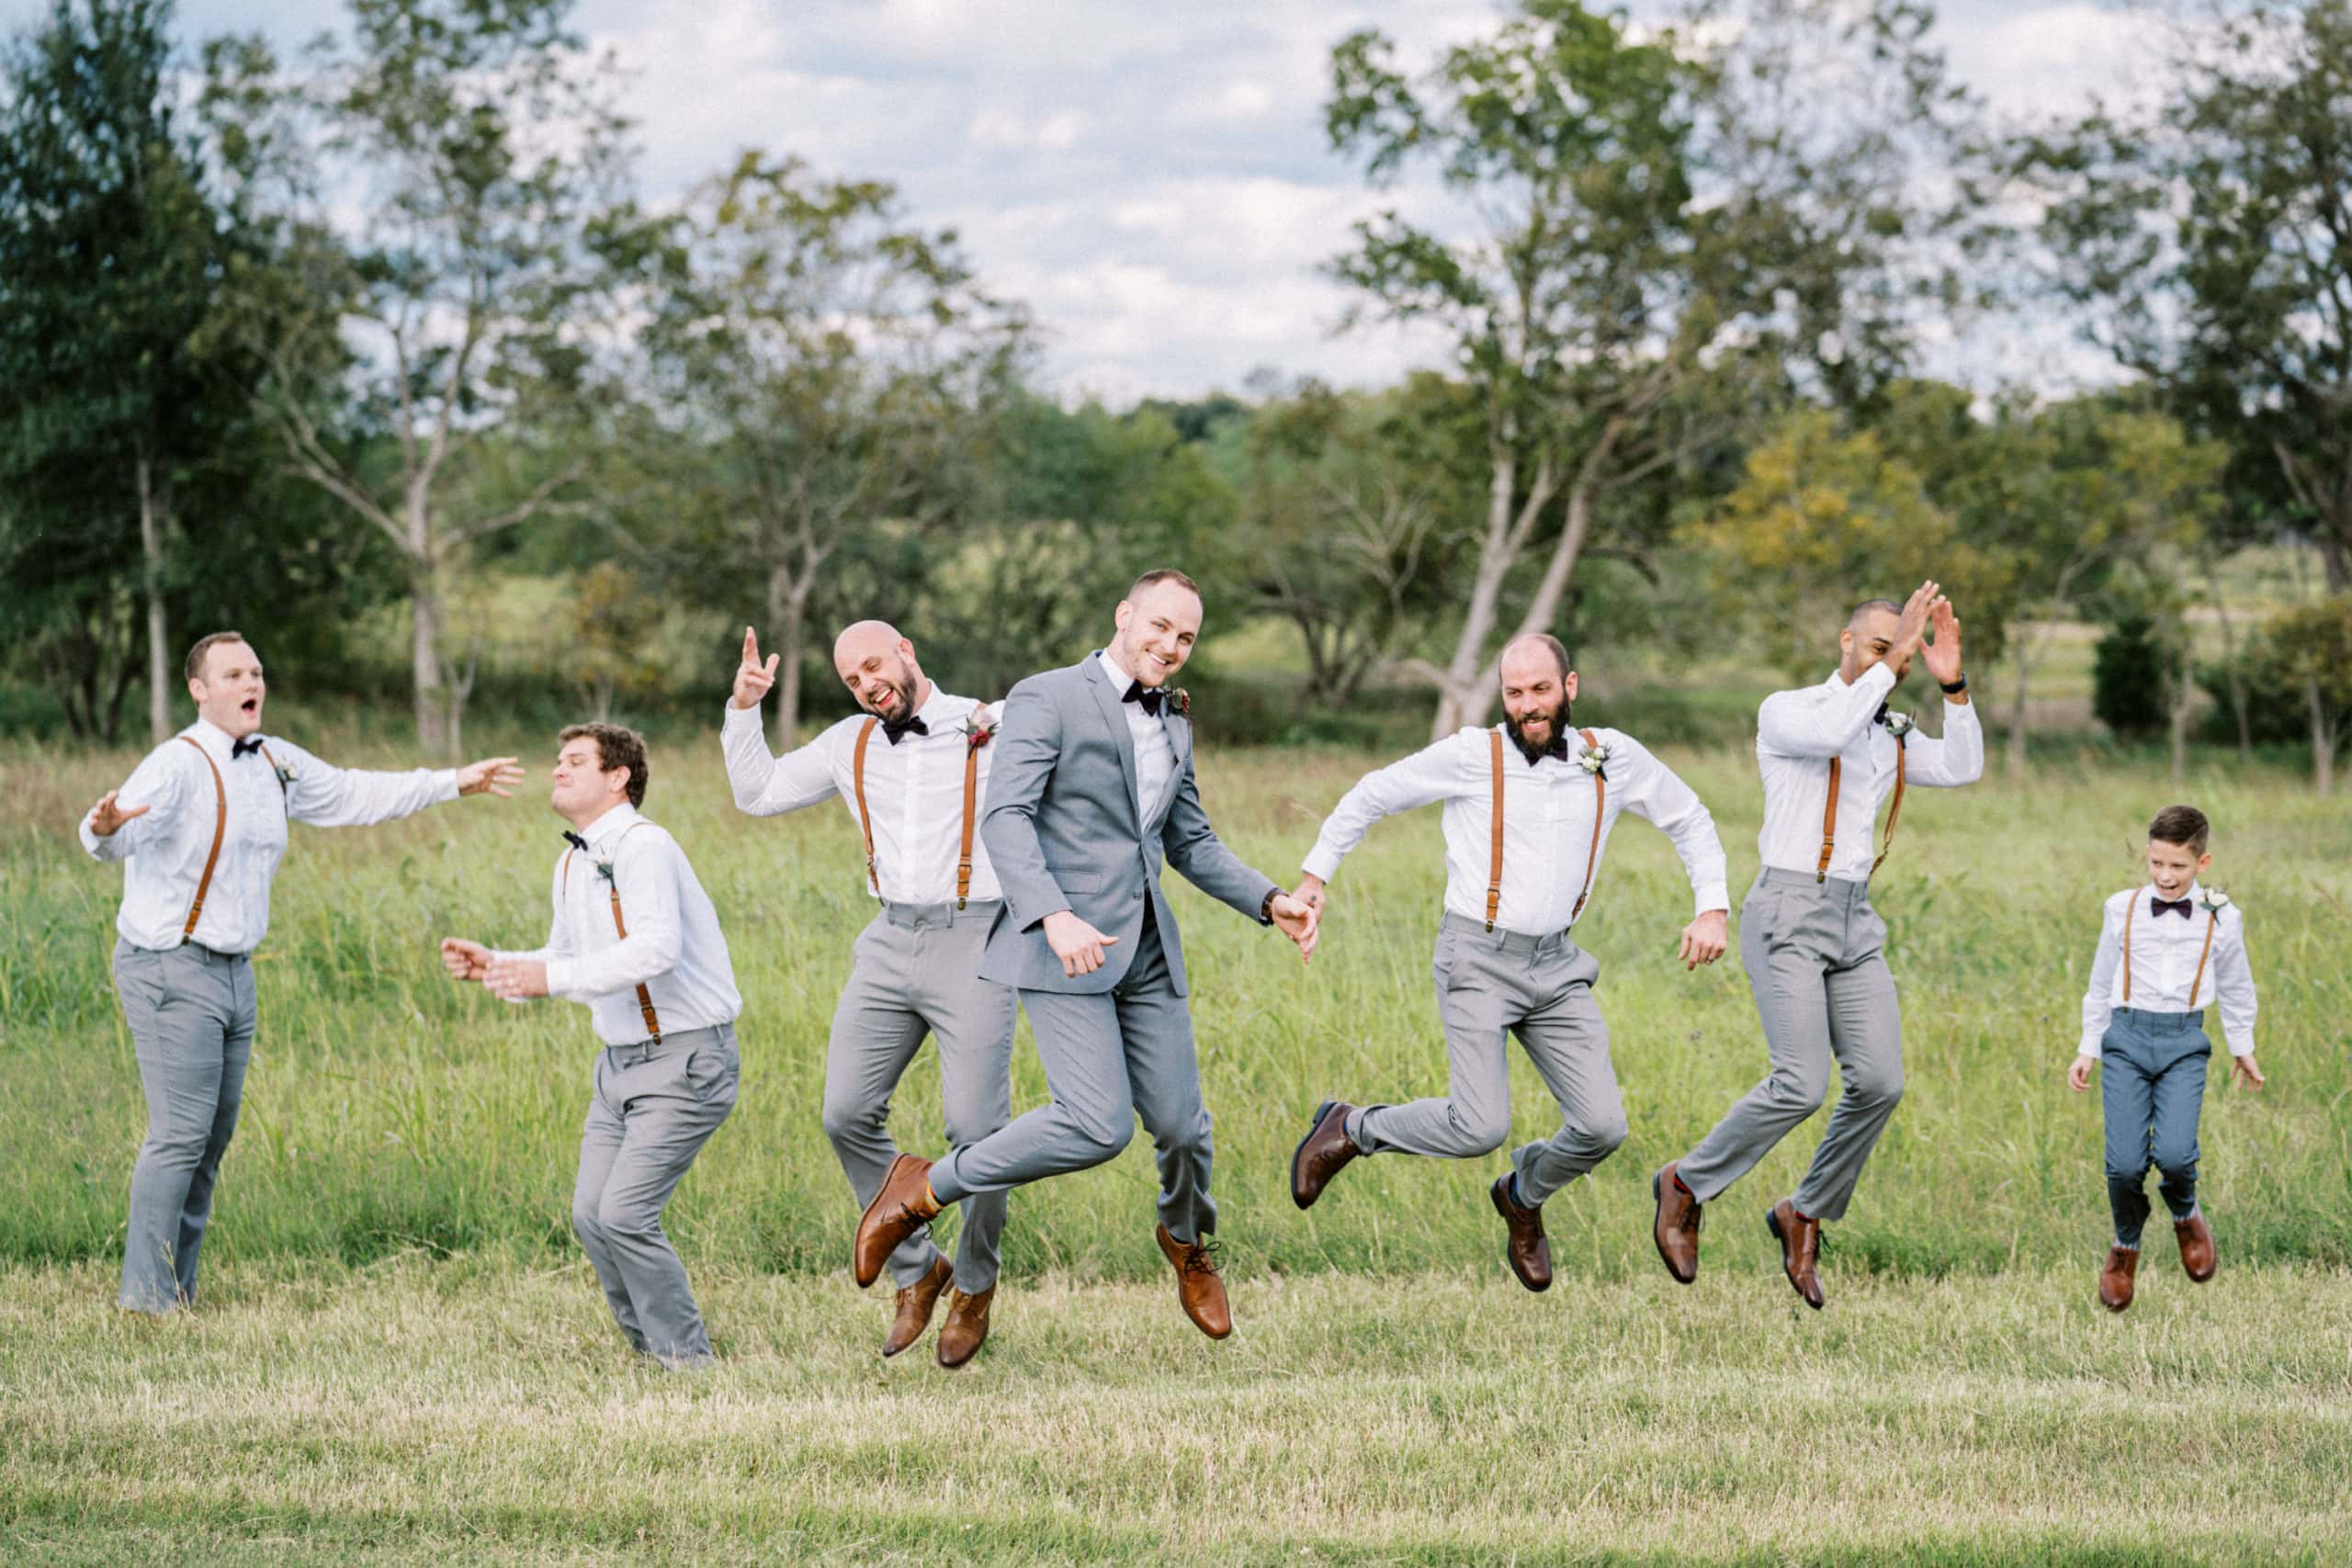 Groom and groomsmen jump together in a field